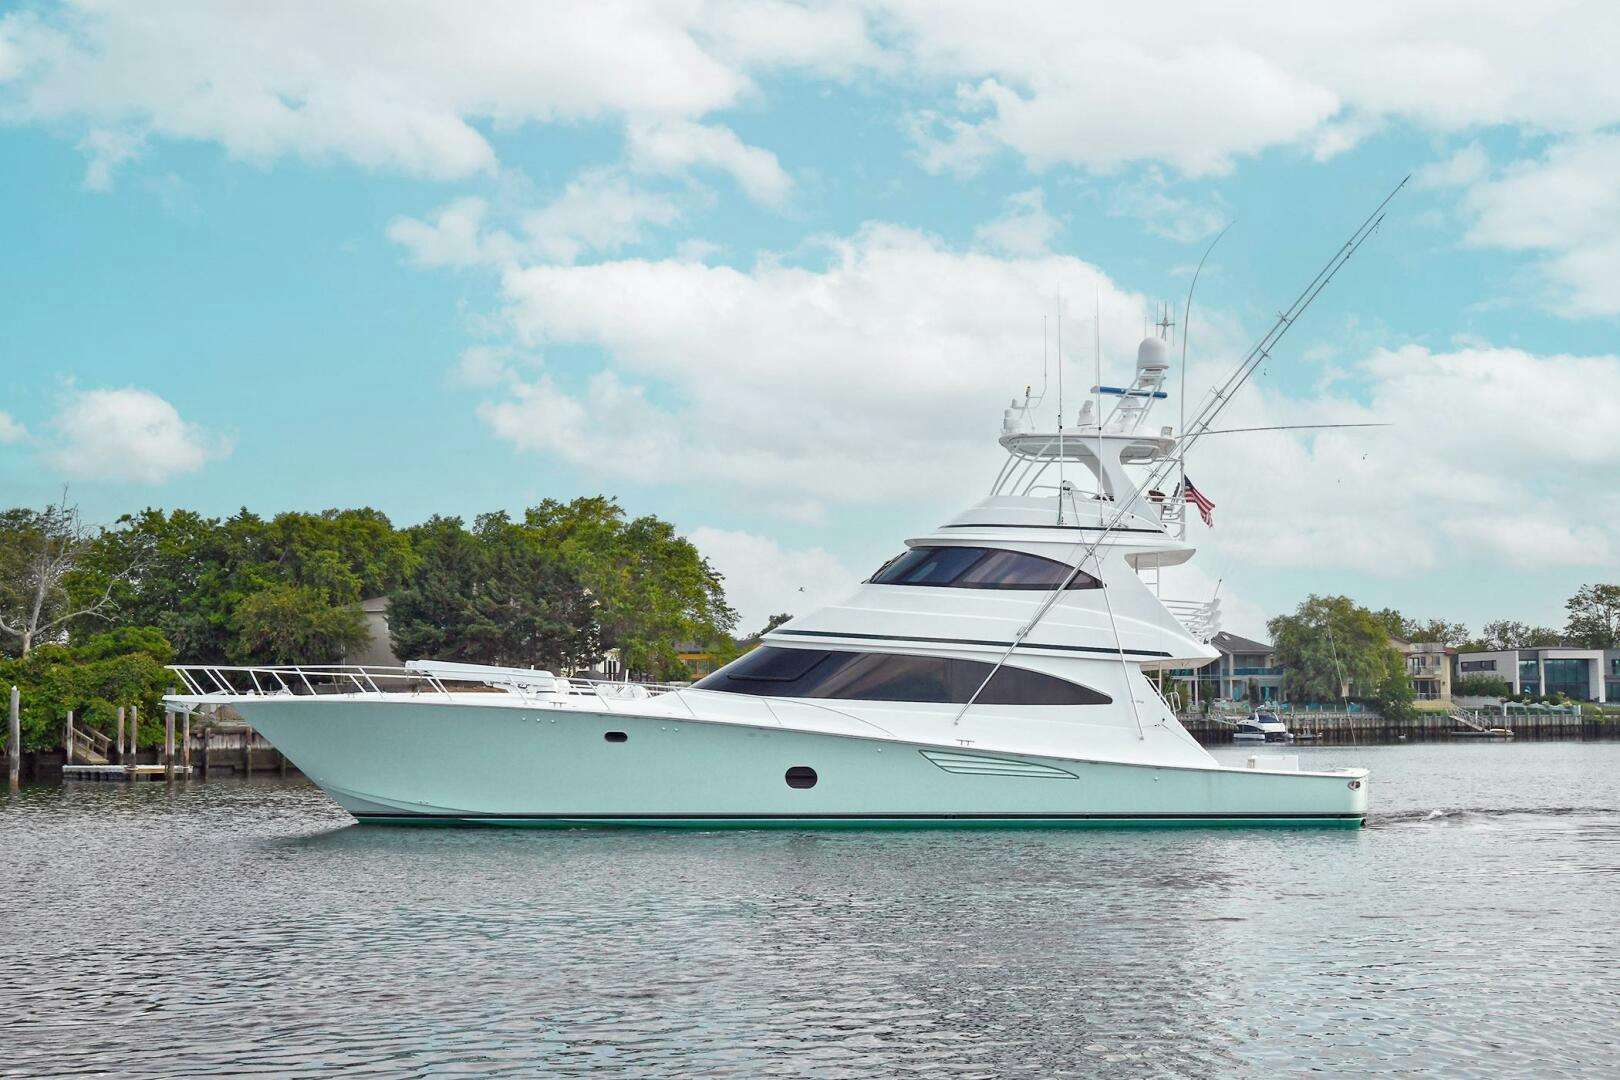 Over the edge
Yacht for Sale